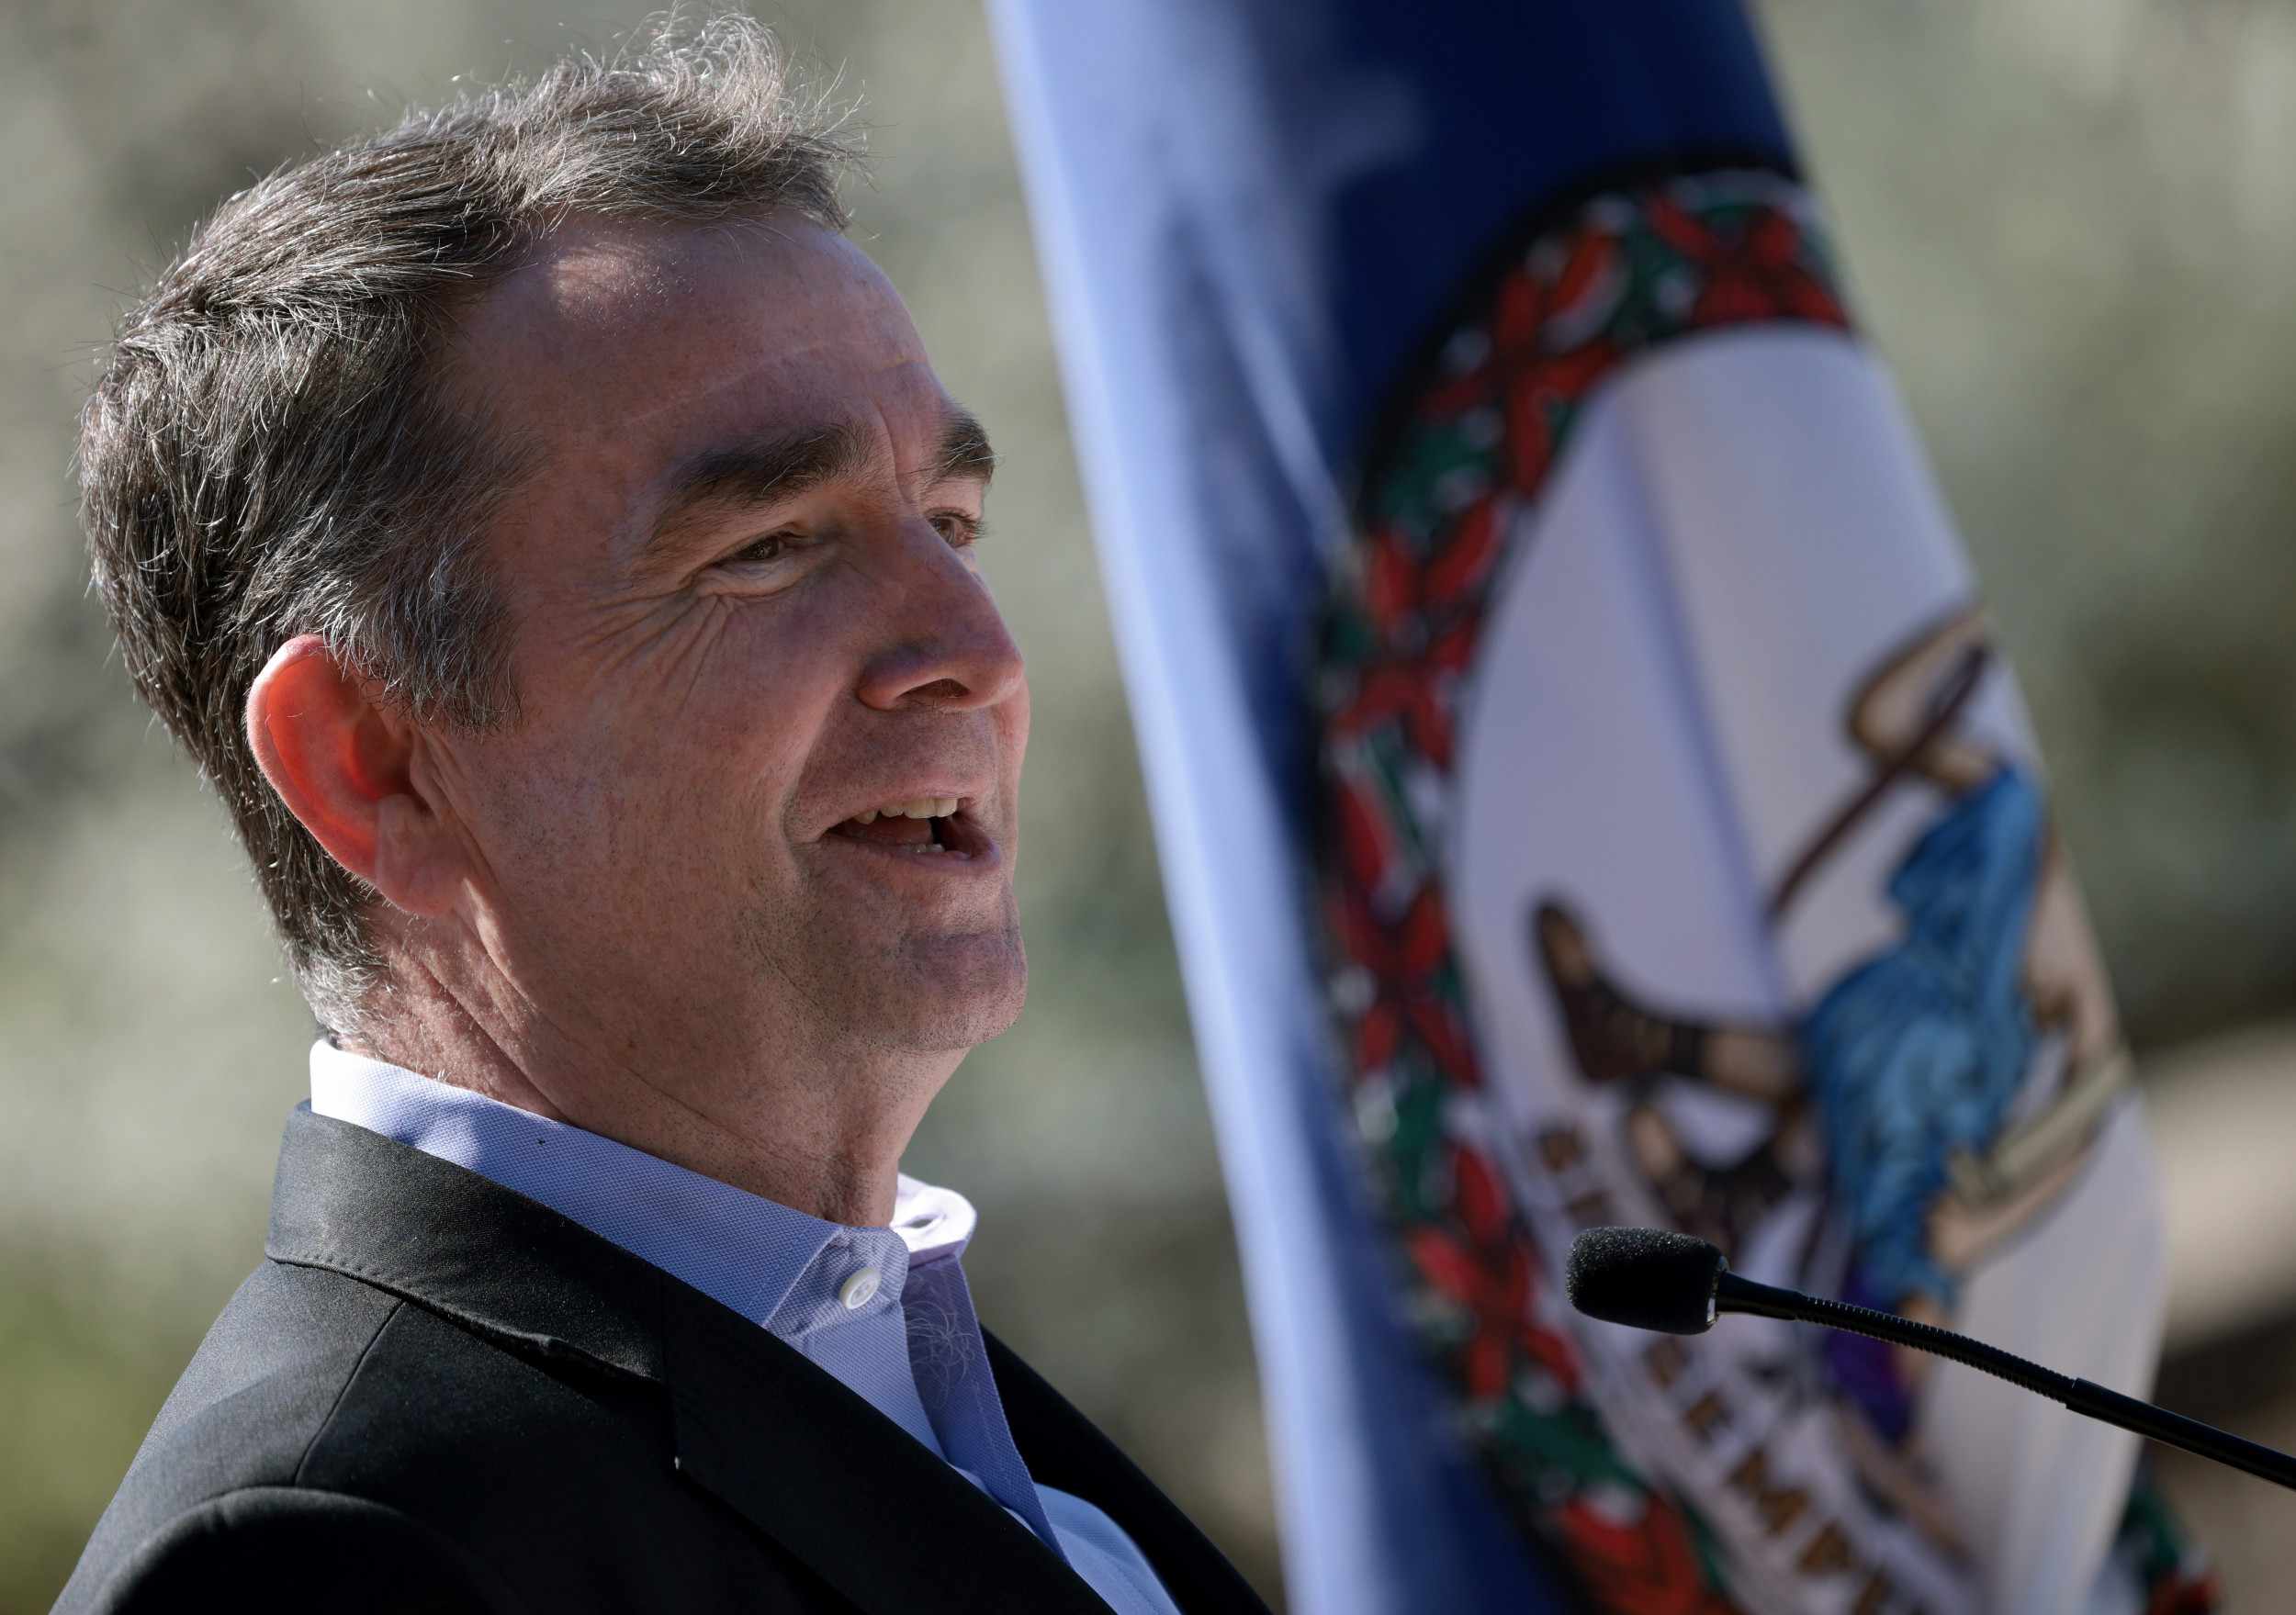 tax, northam, youngkin, governor, virginia, 